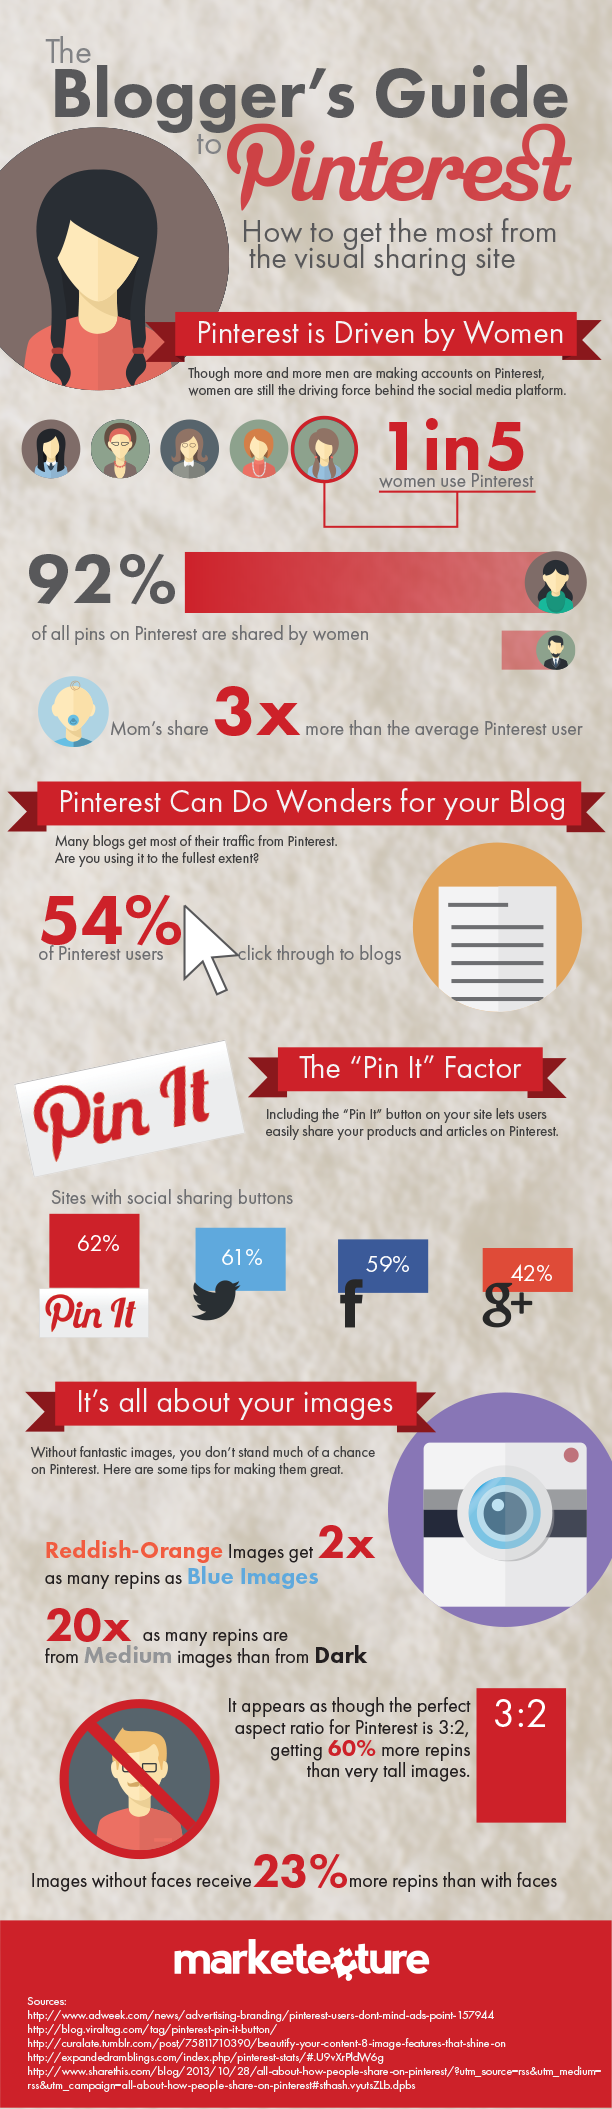 A Blogger’s Guide to Pinterest